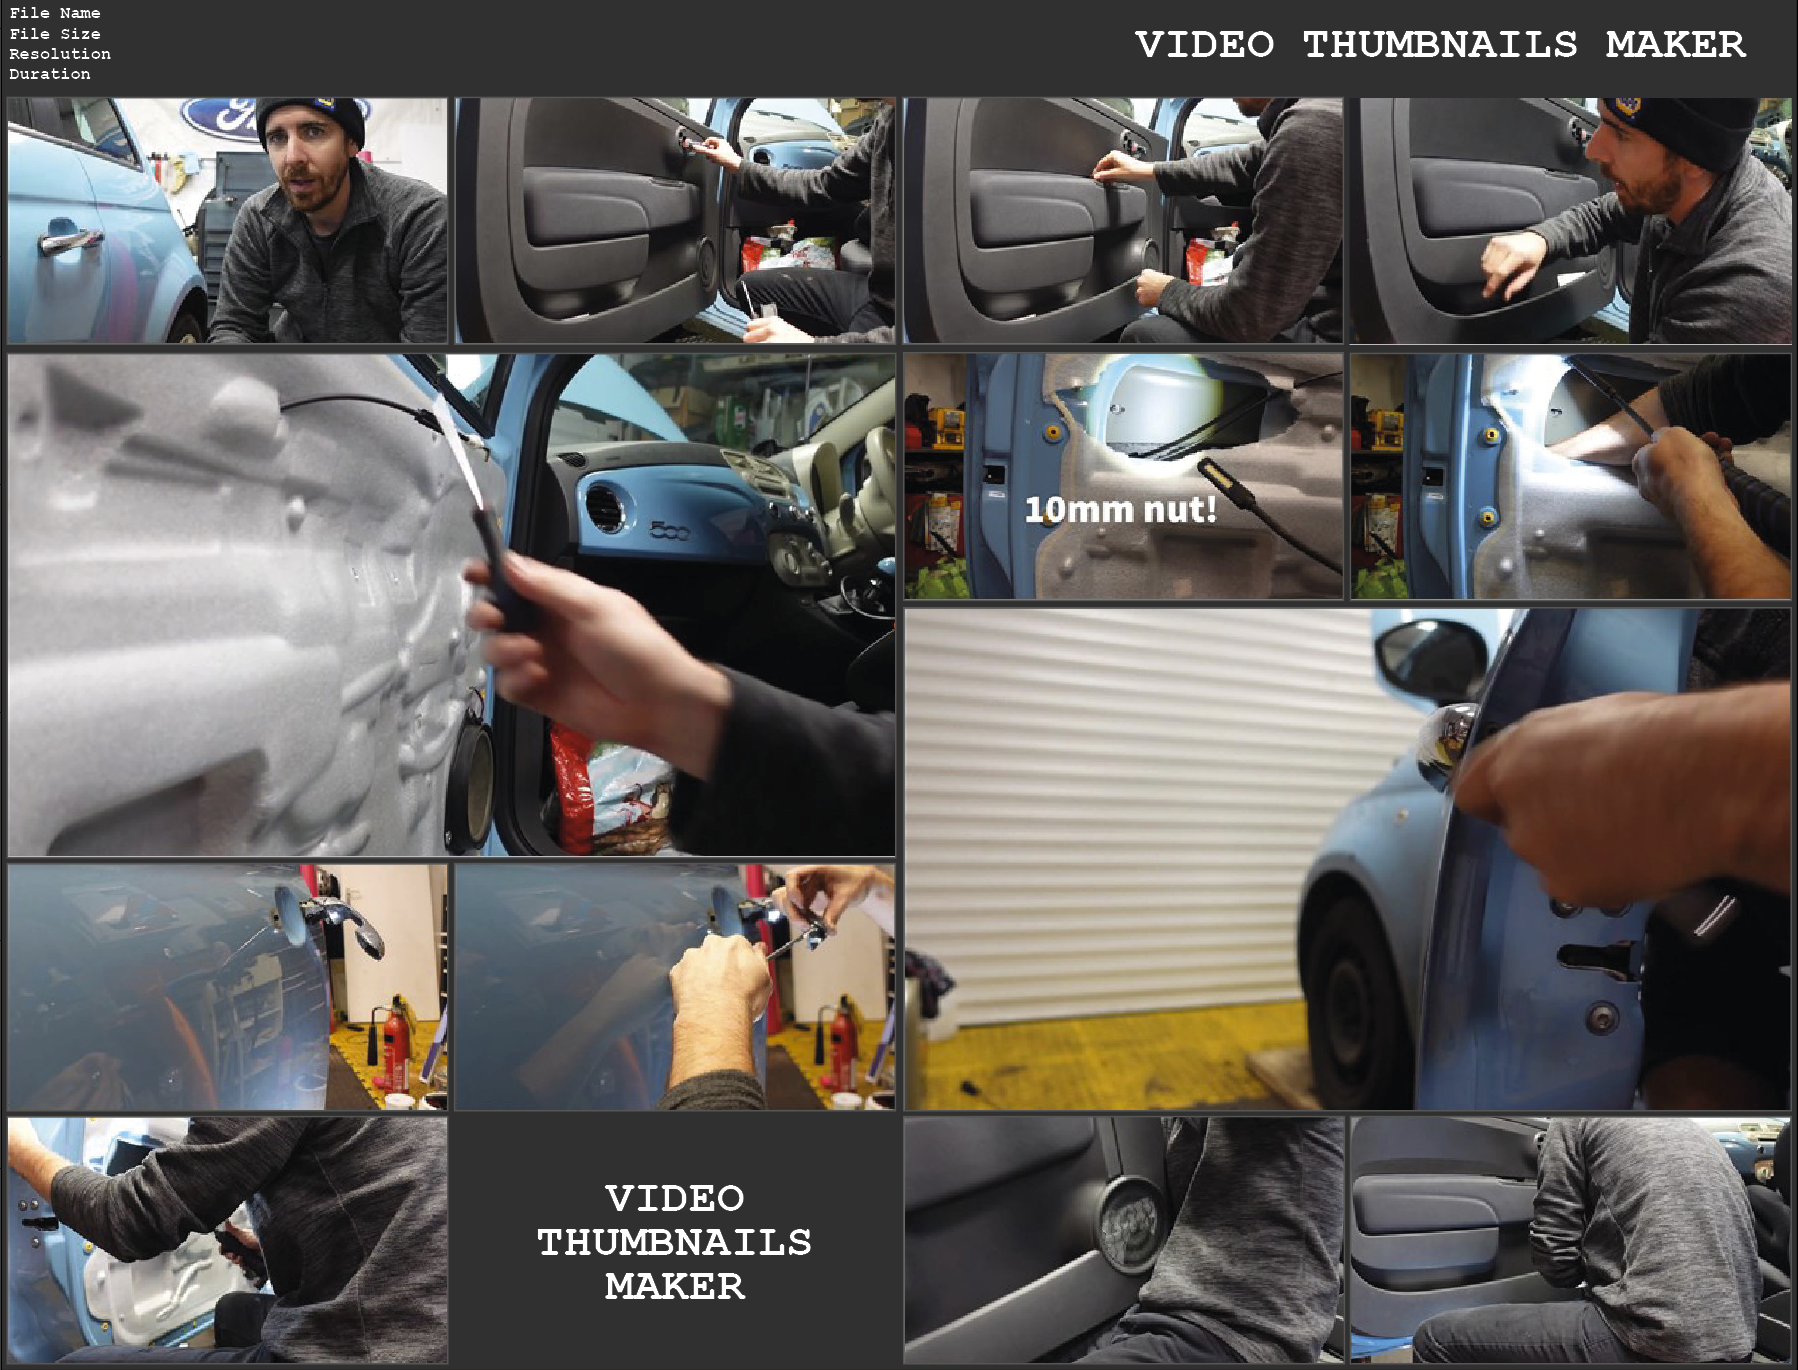 A video is broken down into lots of frames, some of which are used together in a grid or collage to advertise the video, this example is of a man in an autoshop